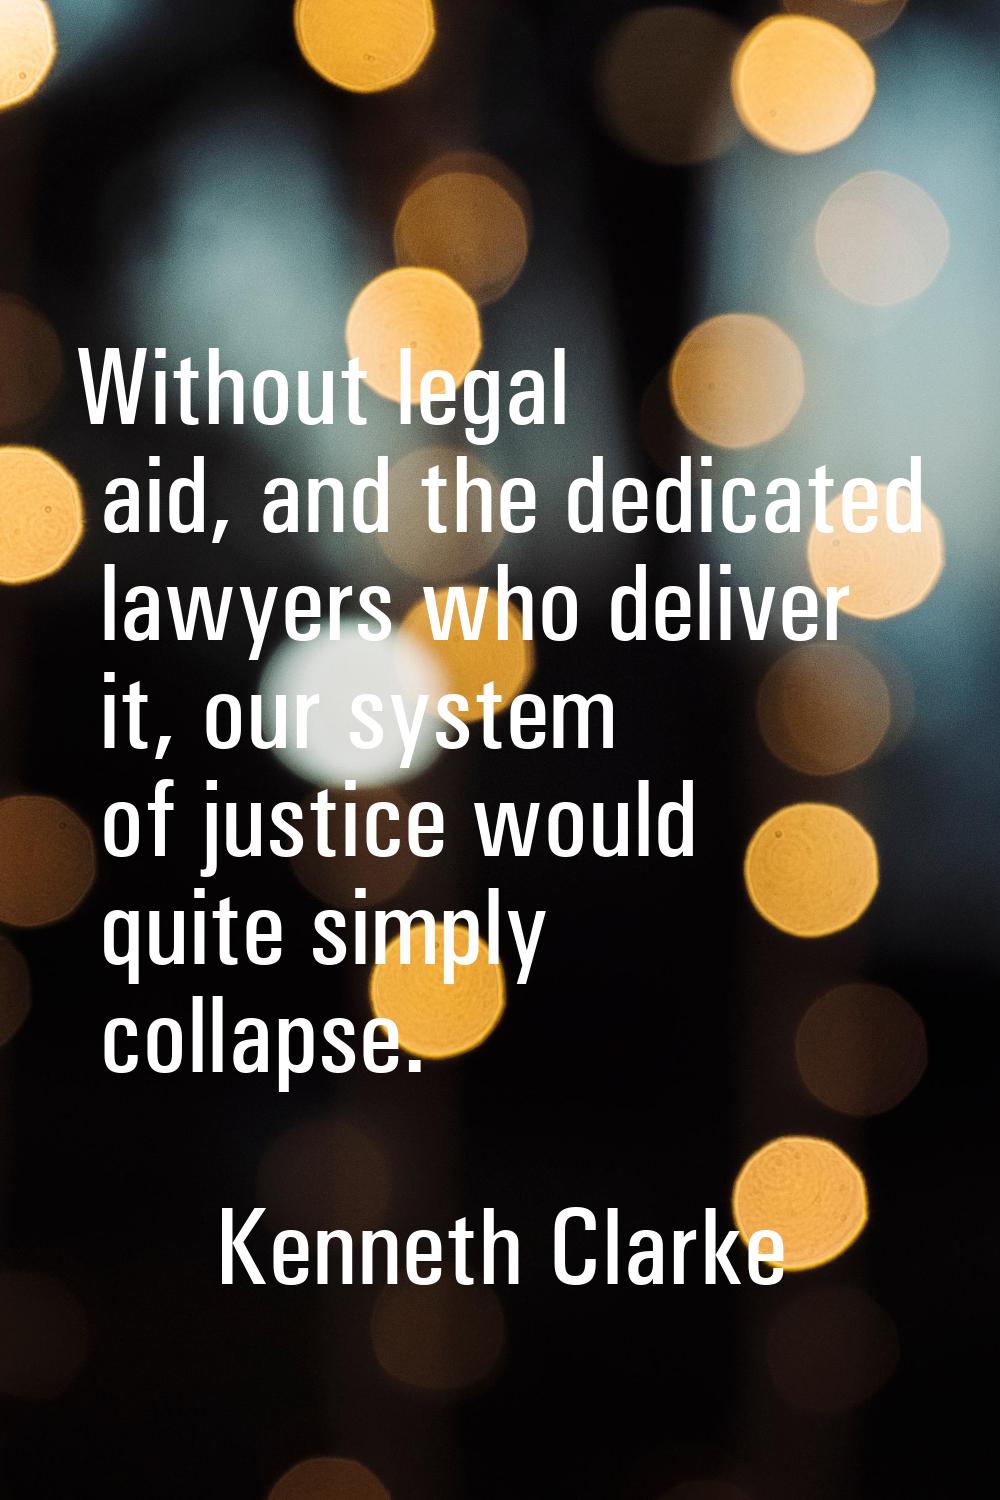 Without legal aid, and the dedicated lawyers who deliver it, our system of justice would quite simp